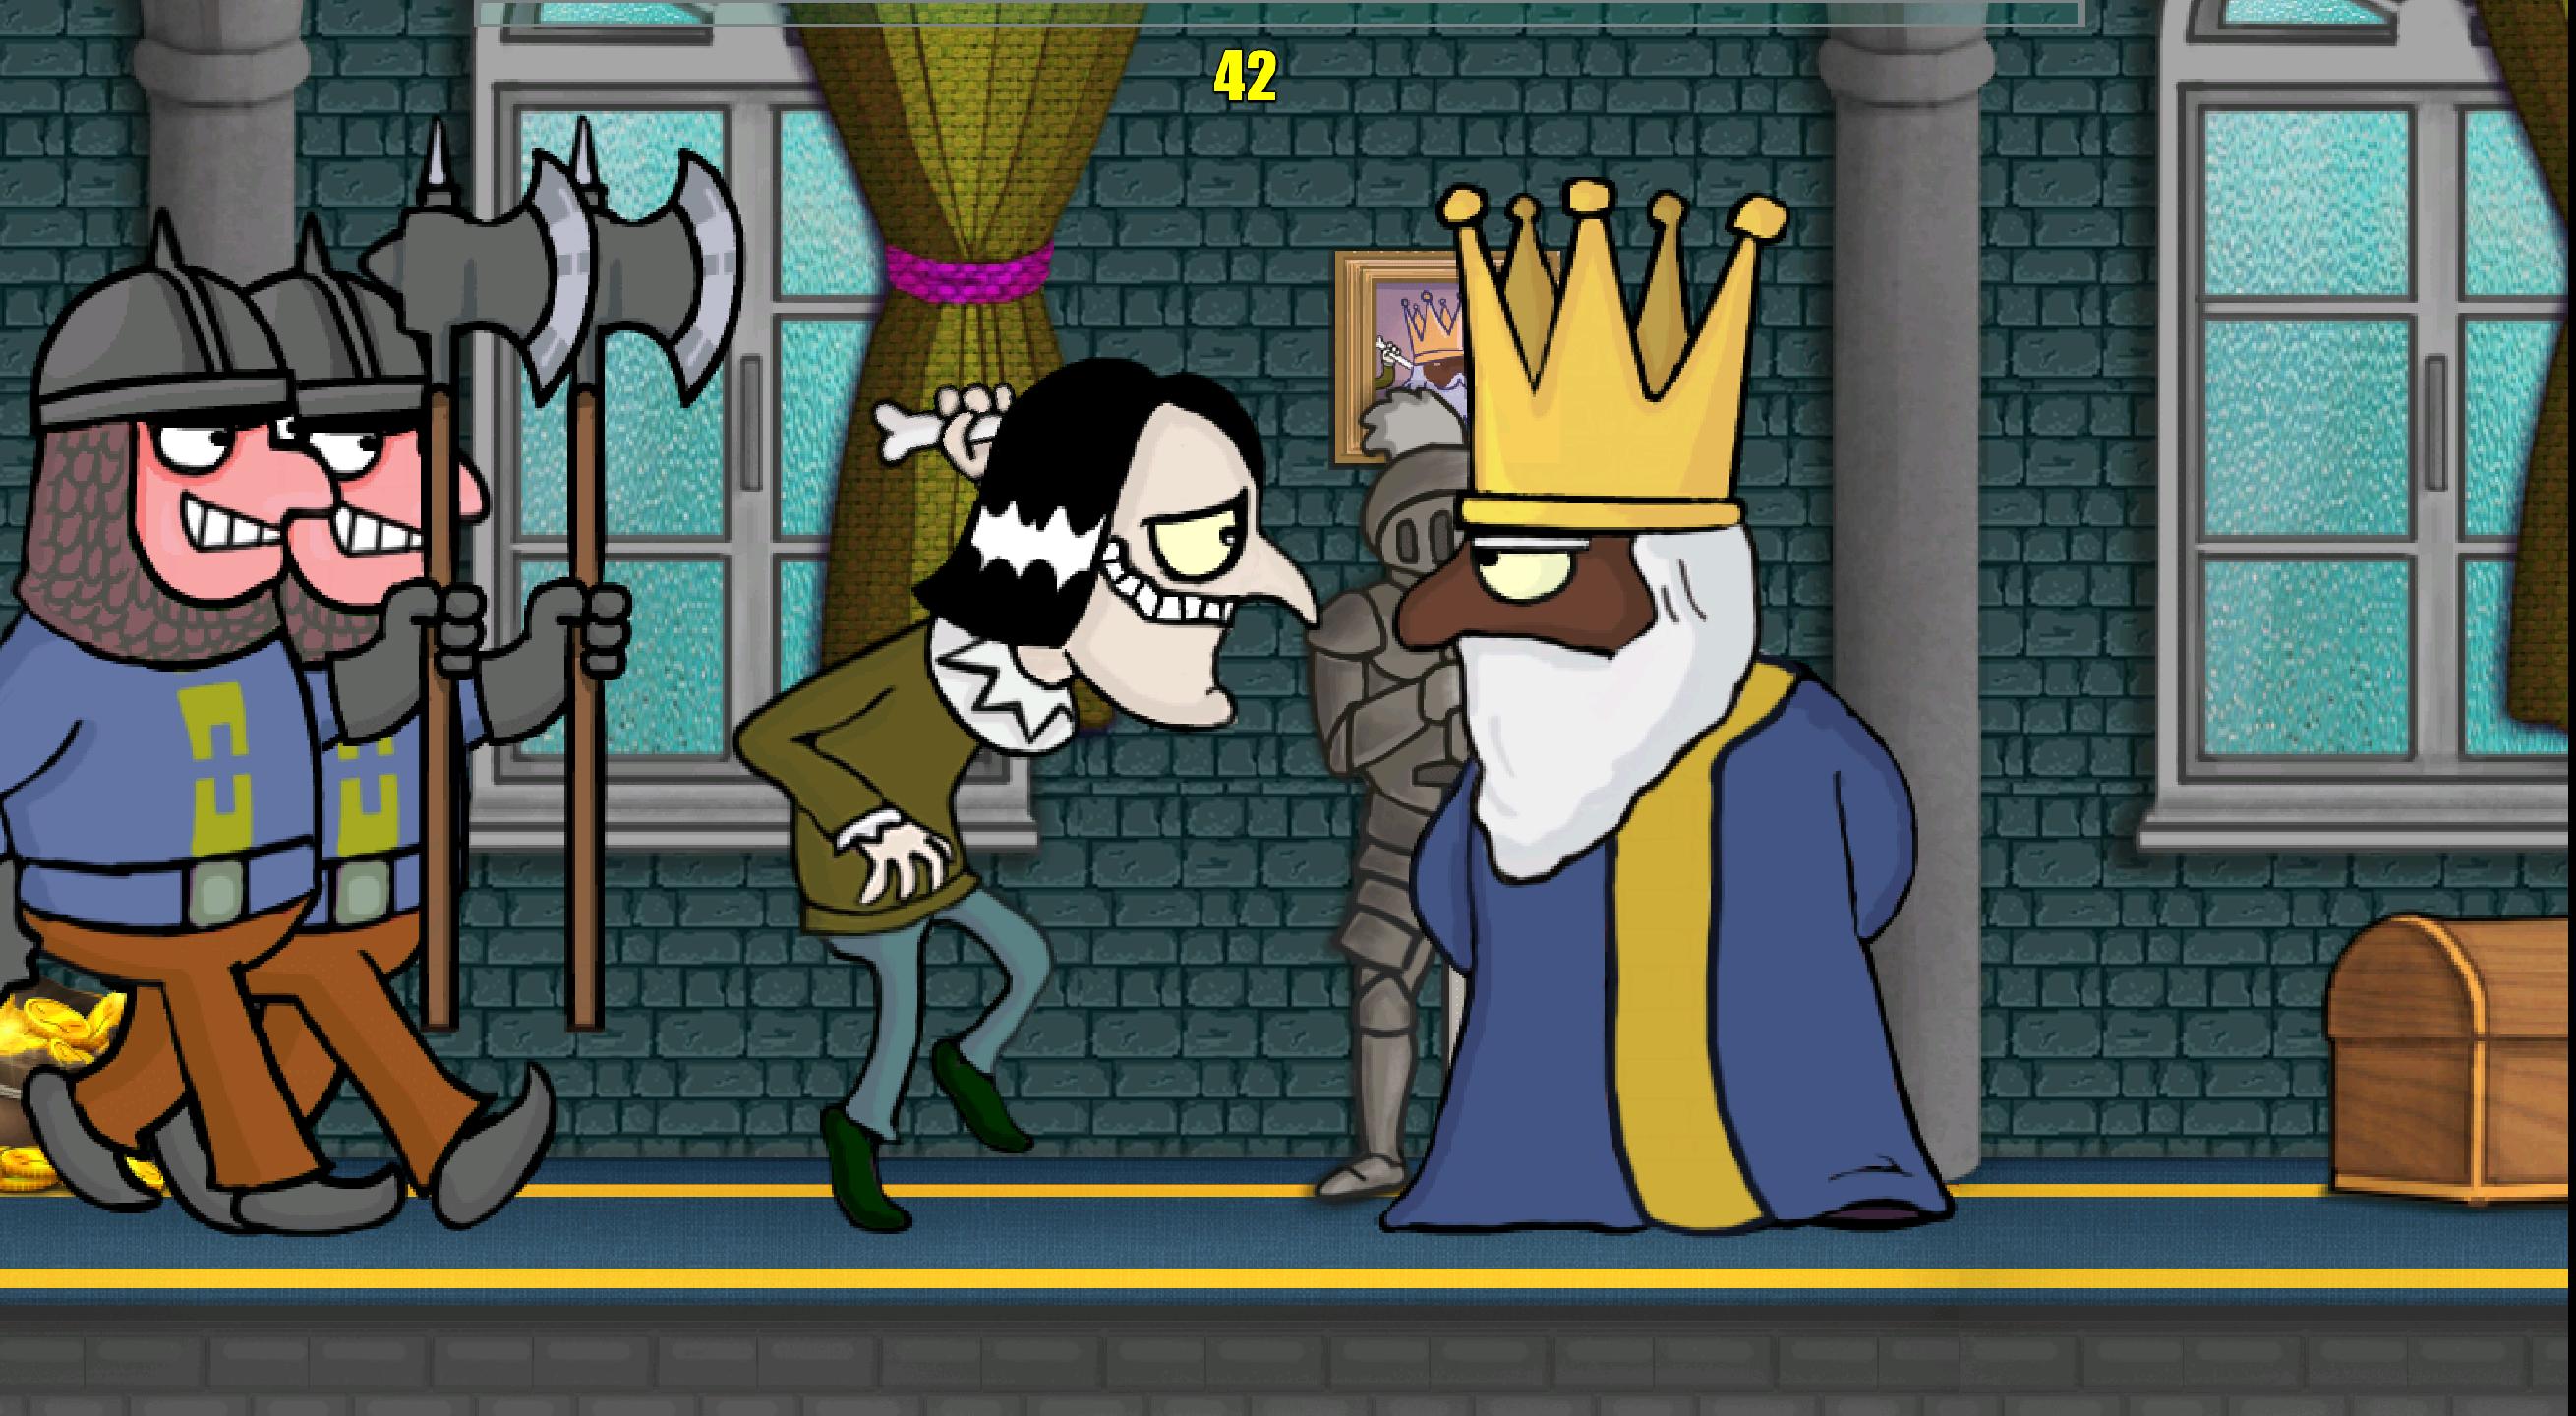 Be king game. Be the King игра. Murder игра Король. Murder be the King.